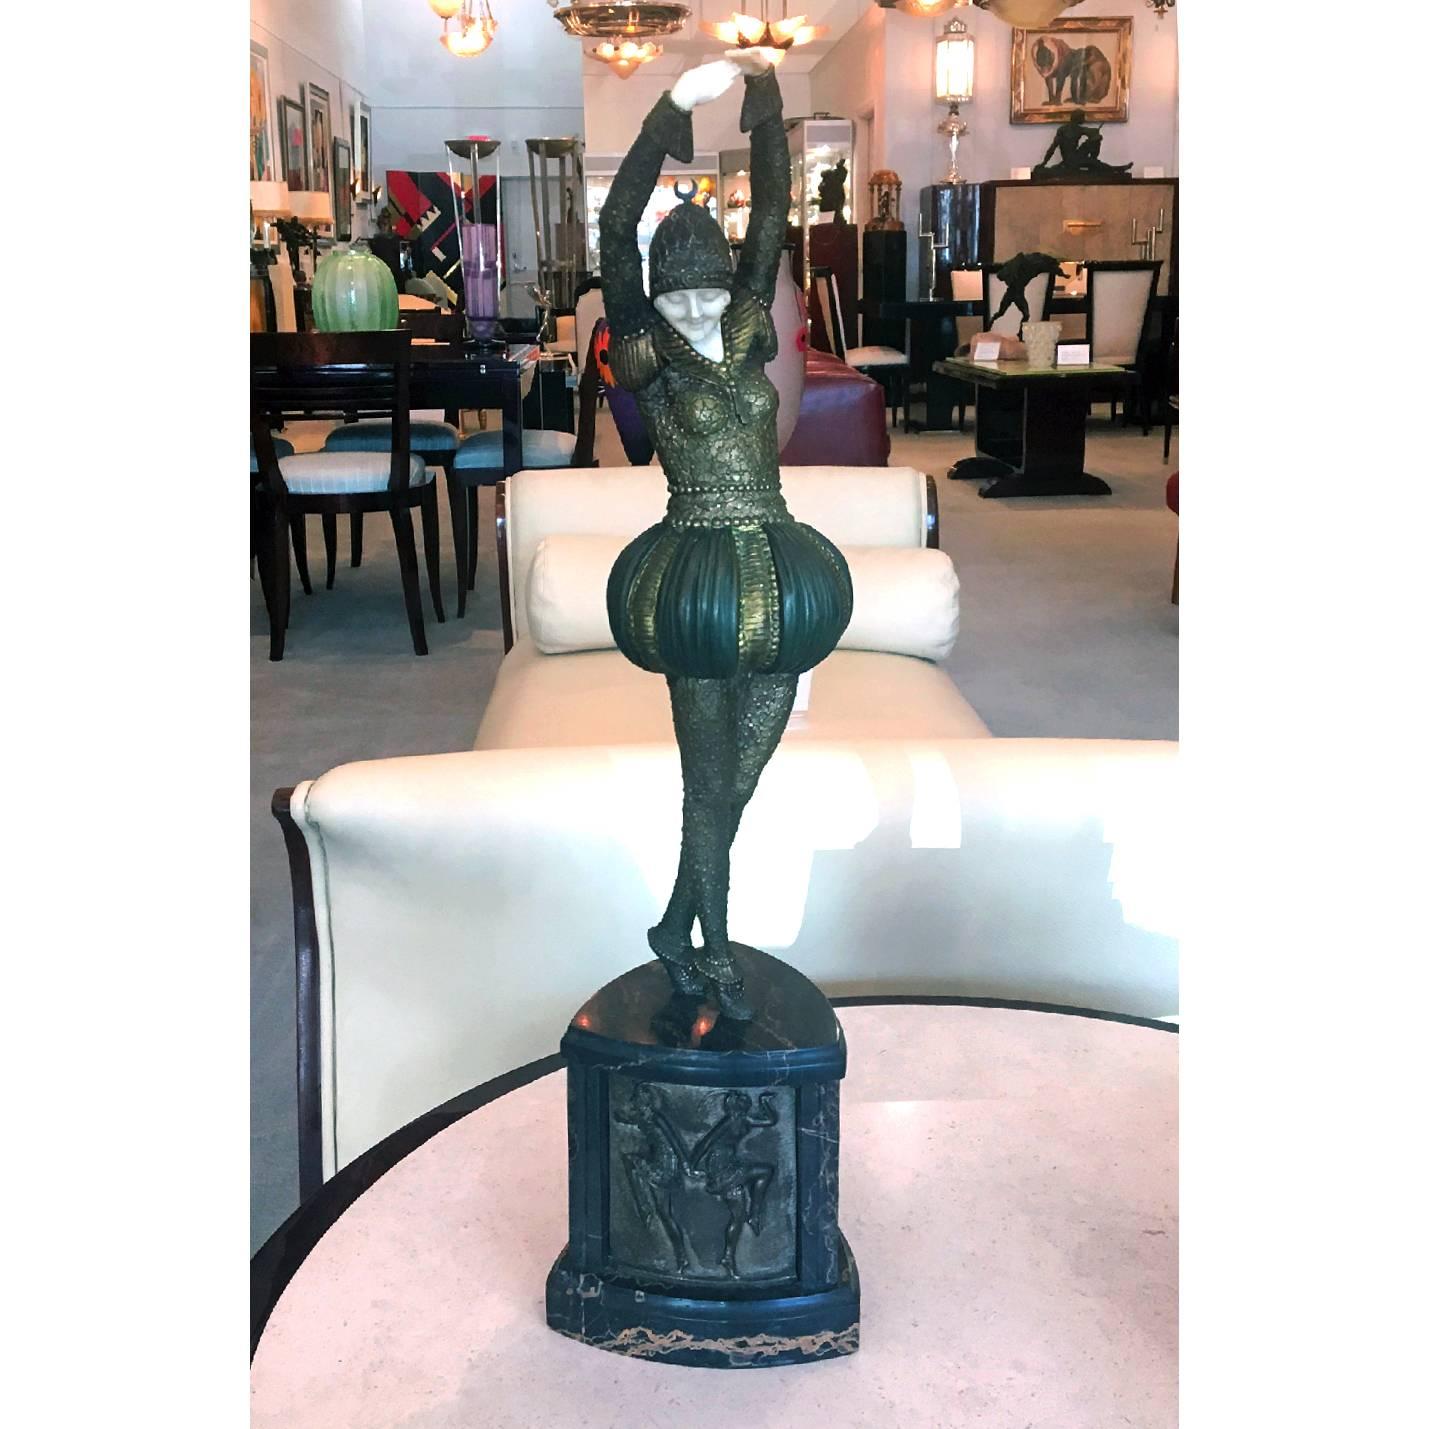 Authentic rare and unique sculpture by the Master of Art Deco Demetre H. Chiparus, this piece is entitled Bayadere and is depicting a female dancer wearing an exotic costume.
Made in France,
circa 1928.
Signature D. H. Chiparus, “Certificate of